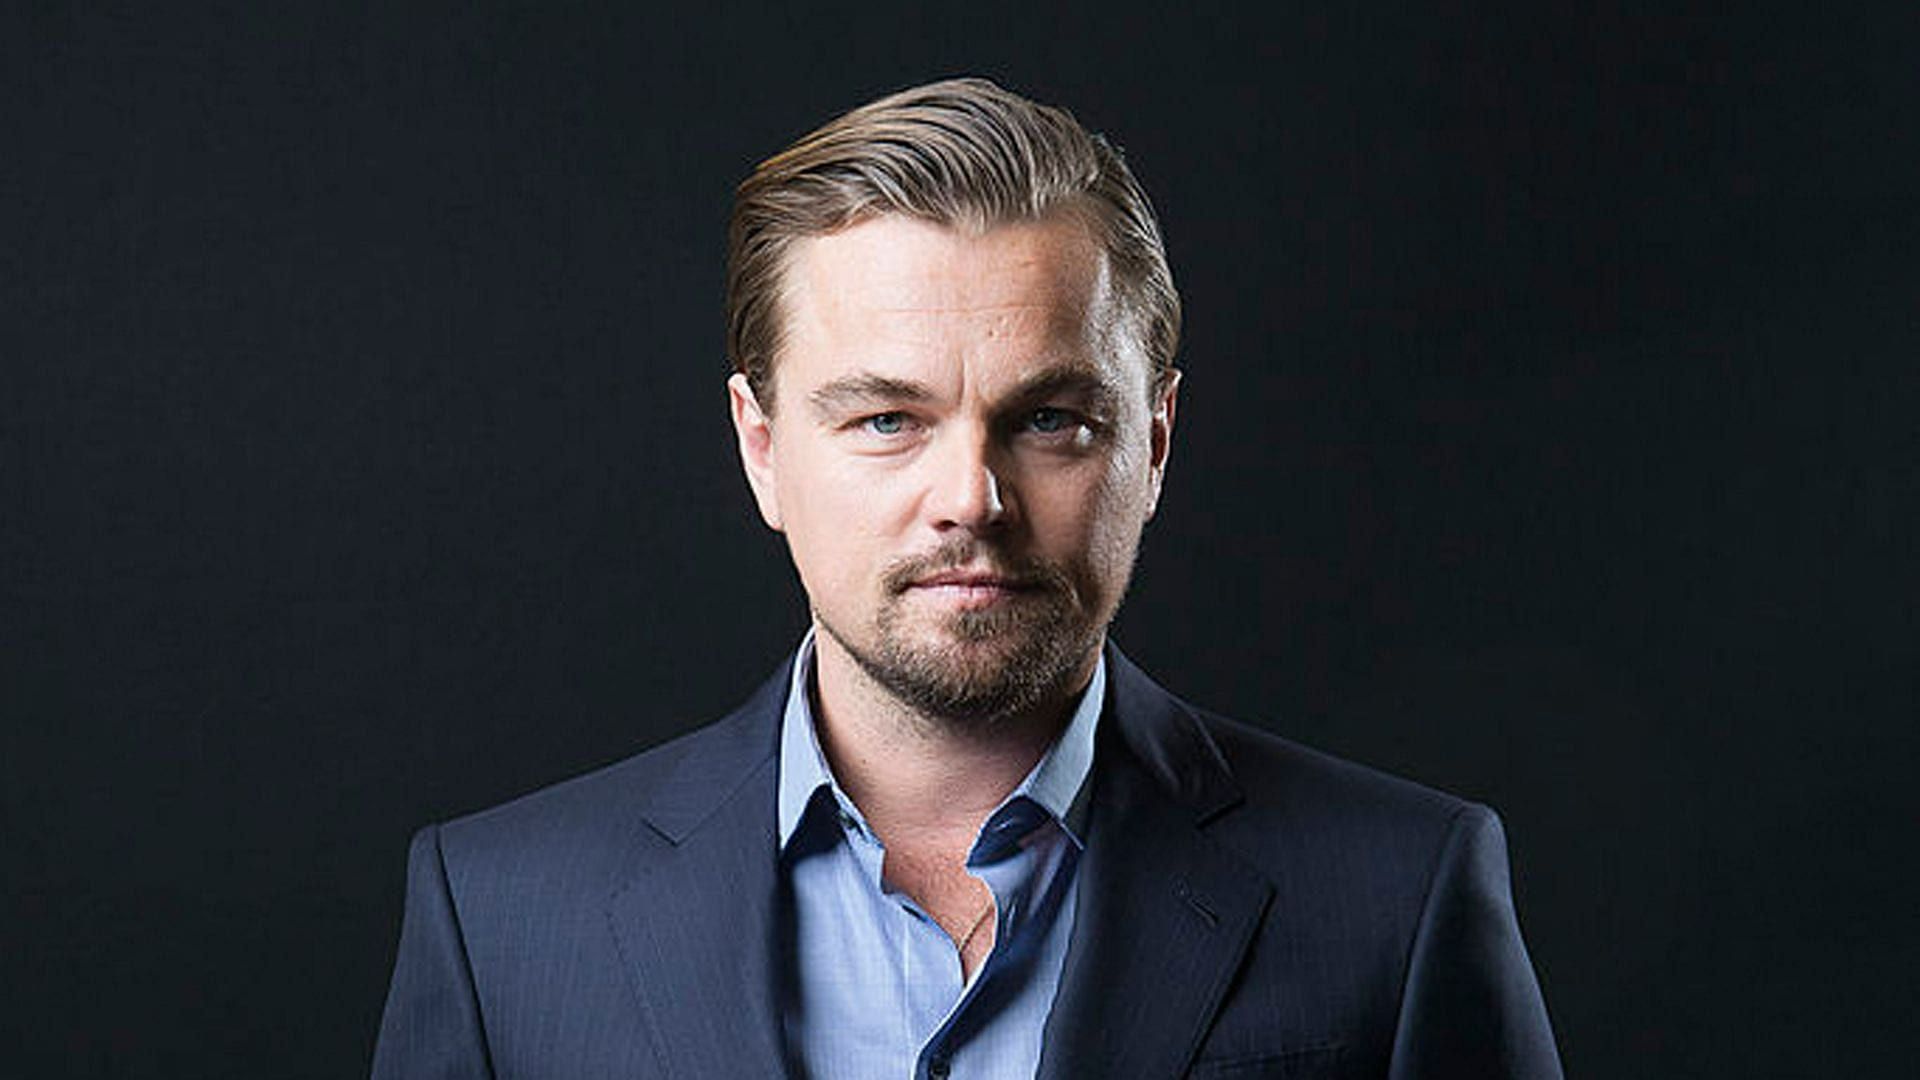 Leo occasionally requires the use of tobacco products. (Image via Pxfuel)